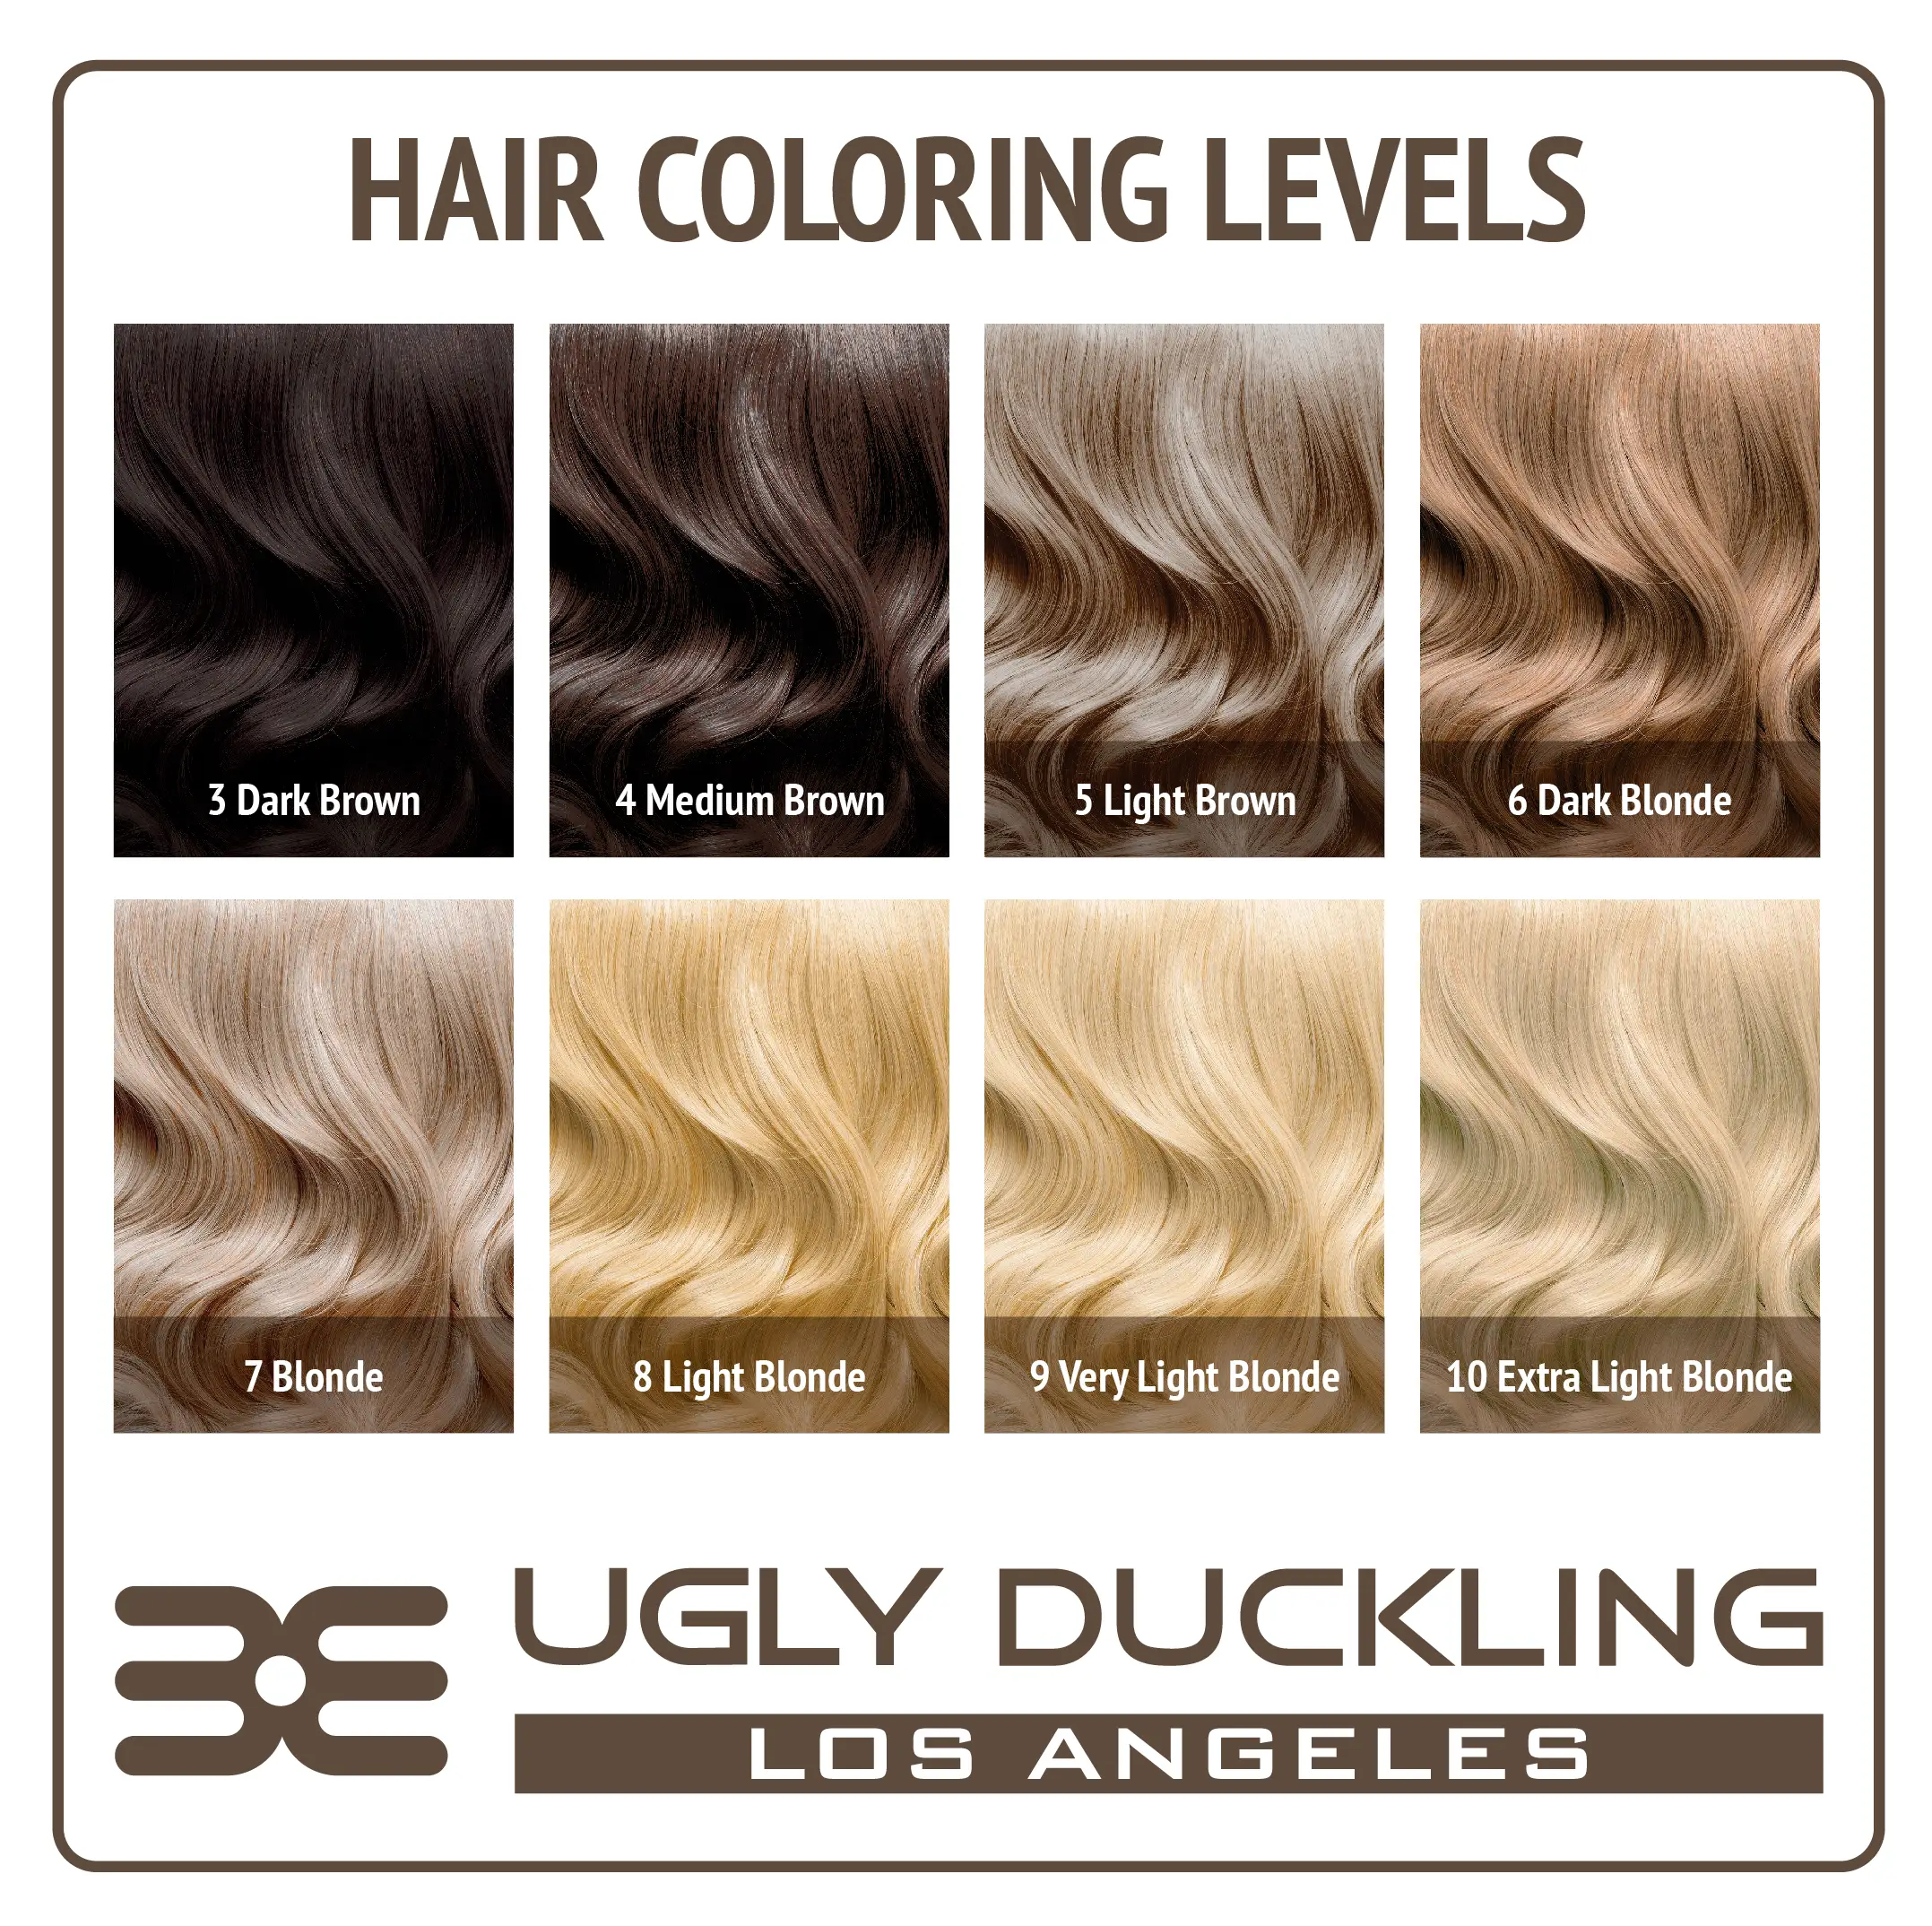 What level is my hair? - Ugly Duckling